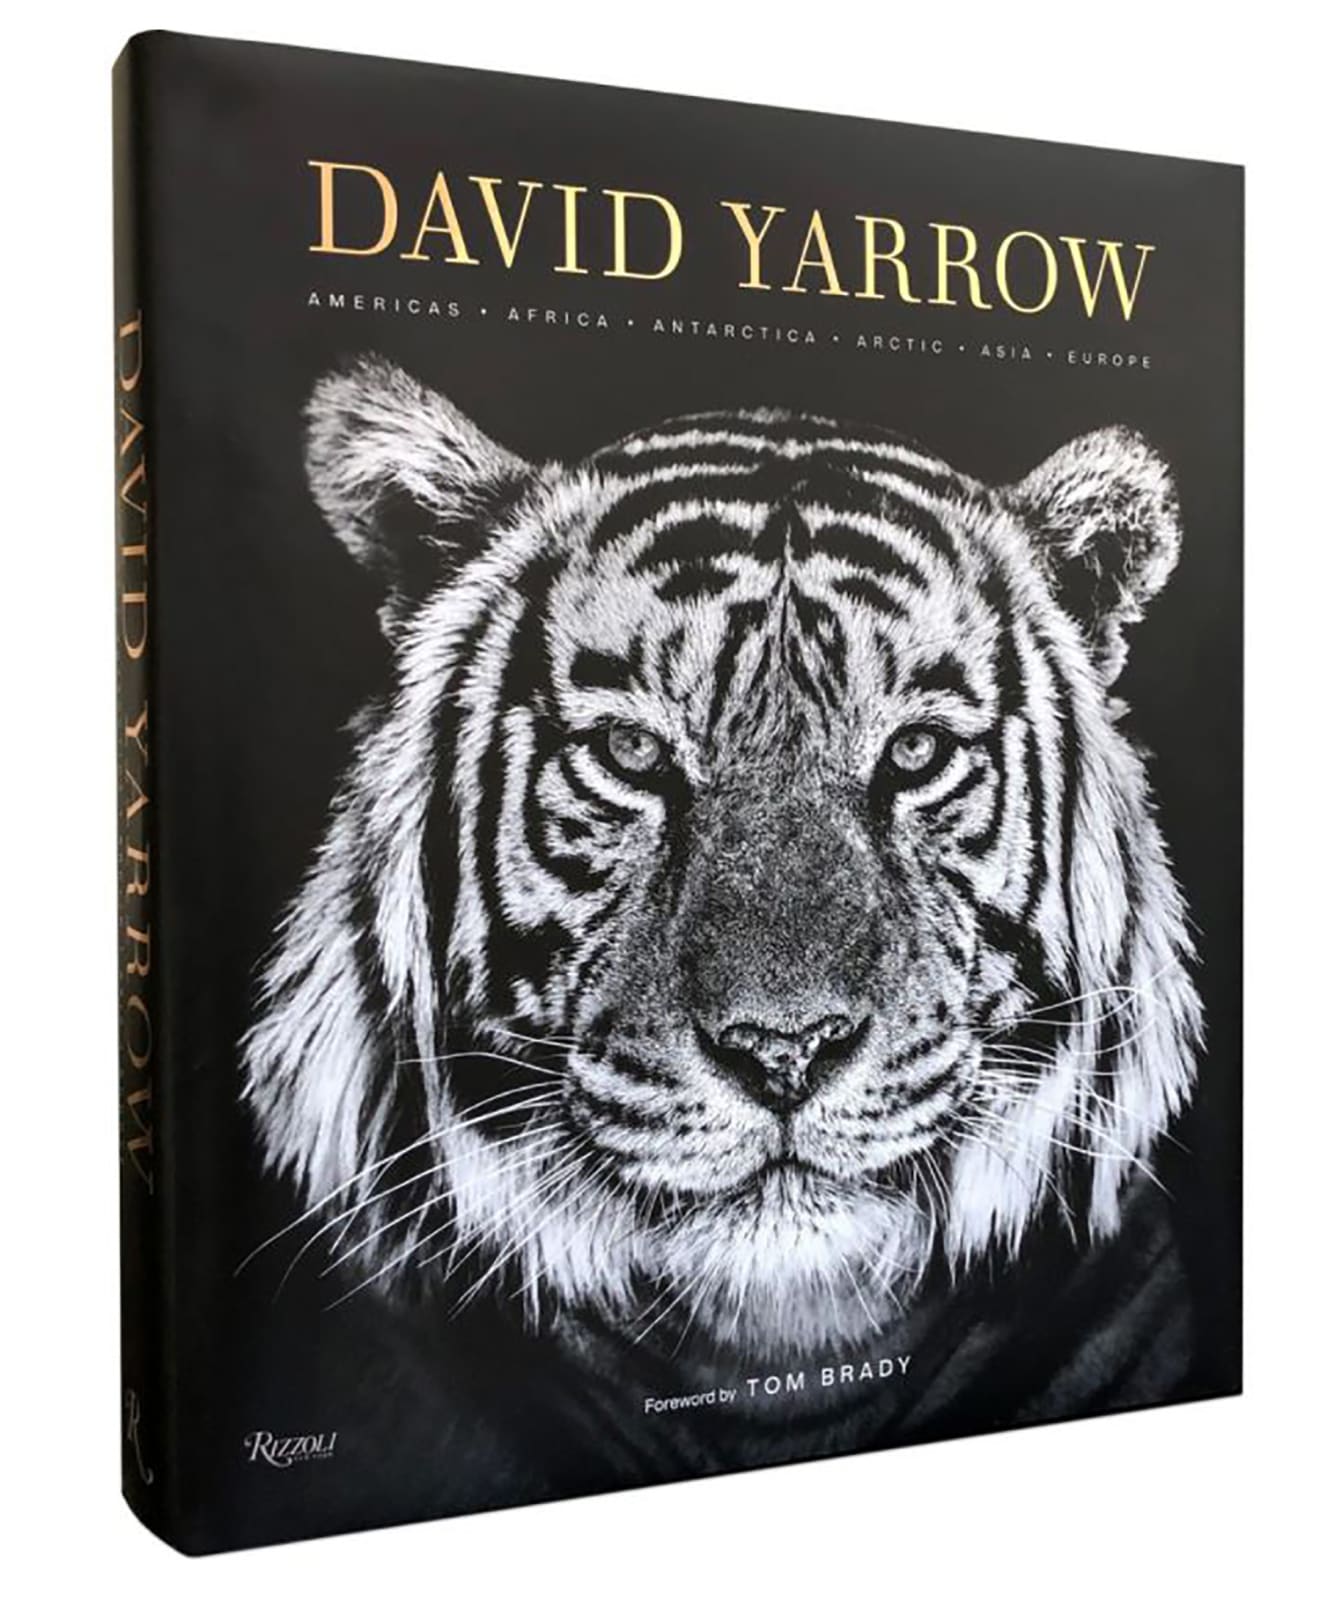 Rizzoli Catalog Collection In September 2019, Rizzoli published their second book by David Yarrow as Rizzoli's flagship book, with a forward written by global NFL star Tom Brady and an afterword written by American cultural icon Cindy Crawford. All royalties from this book will be donated to conservation charities Tusk, in the UK and WildAid, in the US.